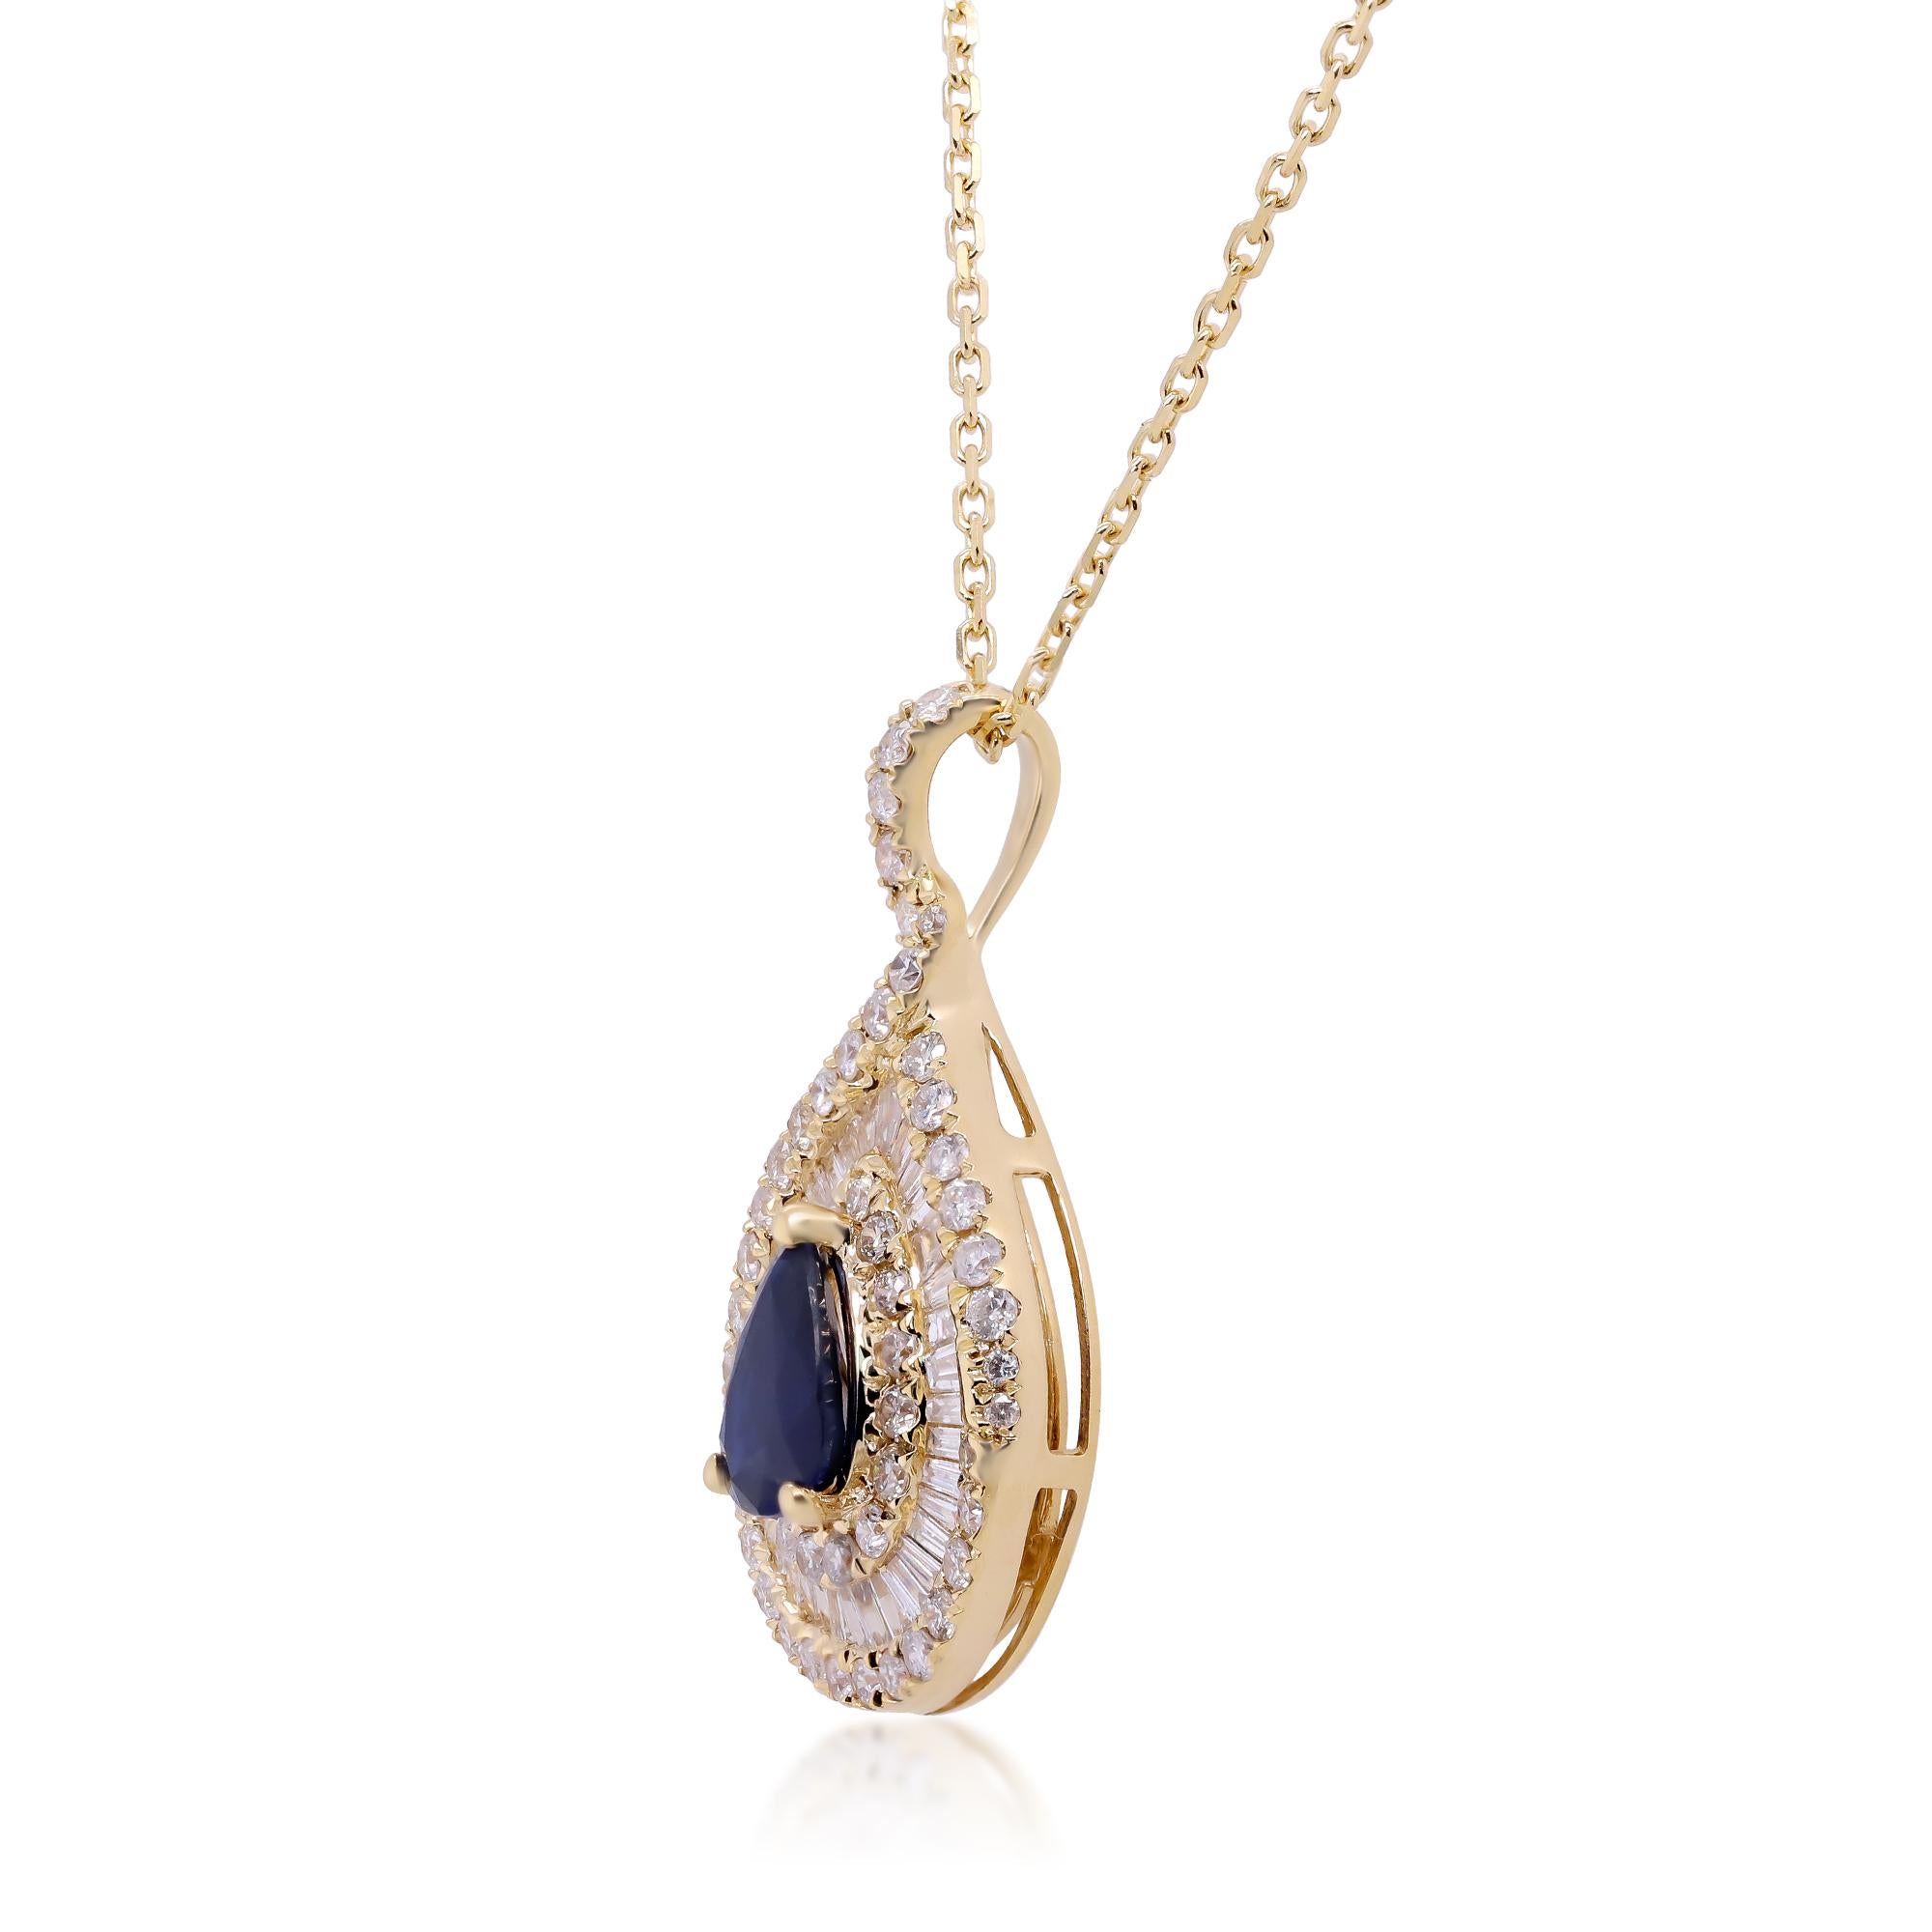 Decorate yourself in elegance with this Pendant is crafted from 14-karat Yellow Gold by Gin & Grace. This Pendant is made up of Pear-Cut Blue Sapphire (1 pcs) 0.70 carat and Round-cut White Diamond (56 Pcs) 0.46 Carat, Baguette-cut White Diamond (35